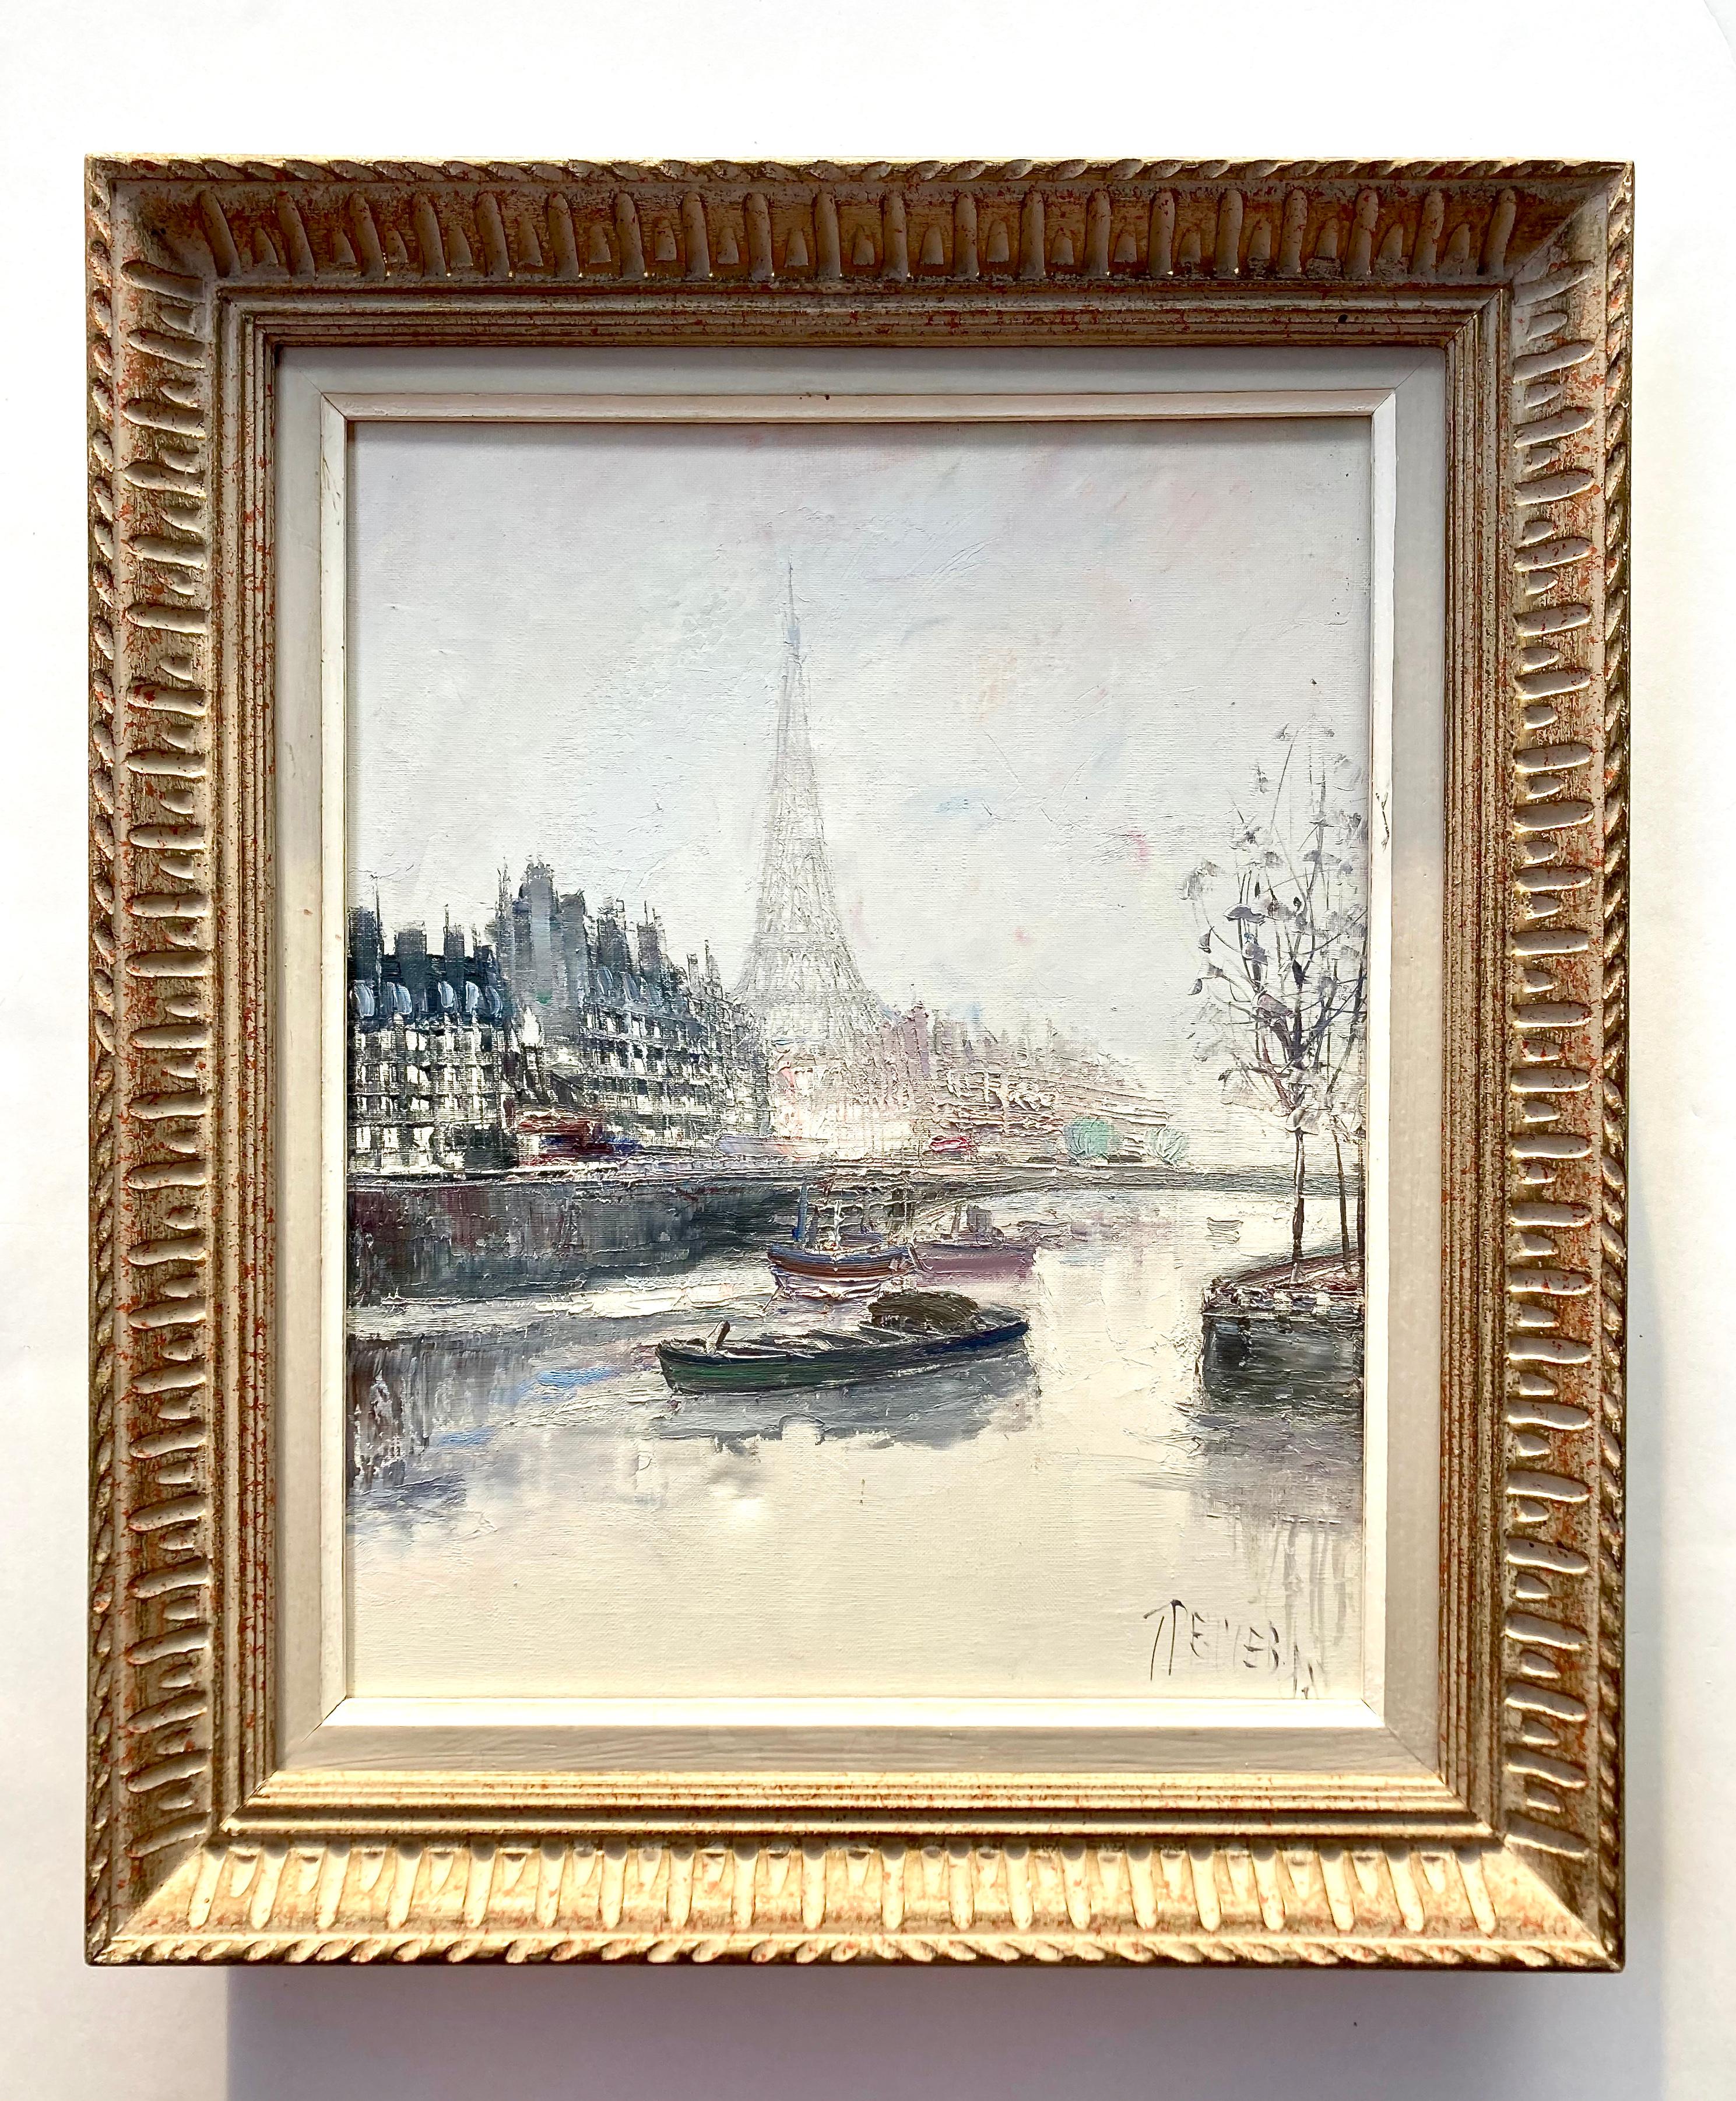 A romantic scene of Paris with the river Seine in the foreground and the Eiffel Tower in the background. This oil painting on stretched cavas dates from 1988 (see back) and is signed by the artist in the lower right corner. This might be a somewhat